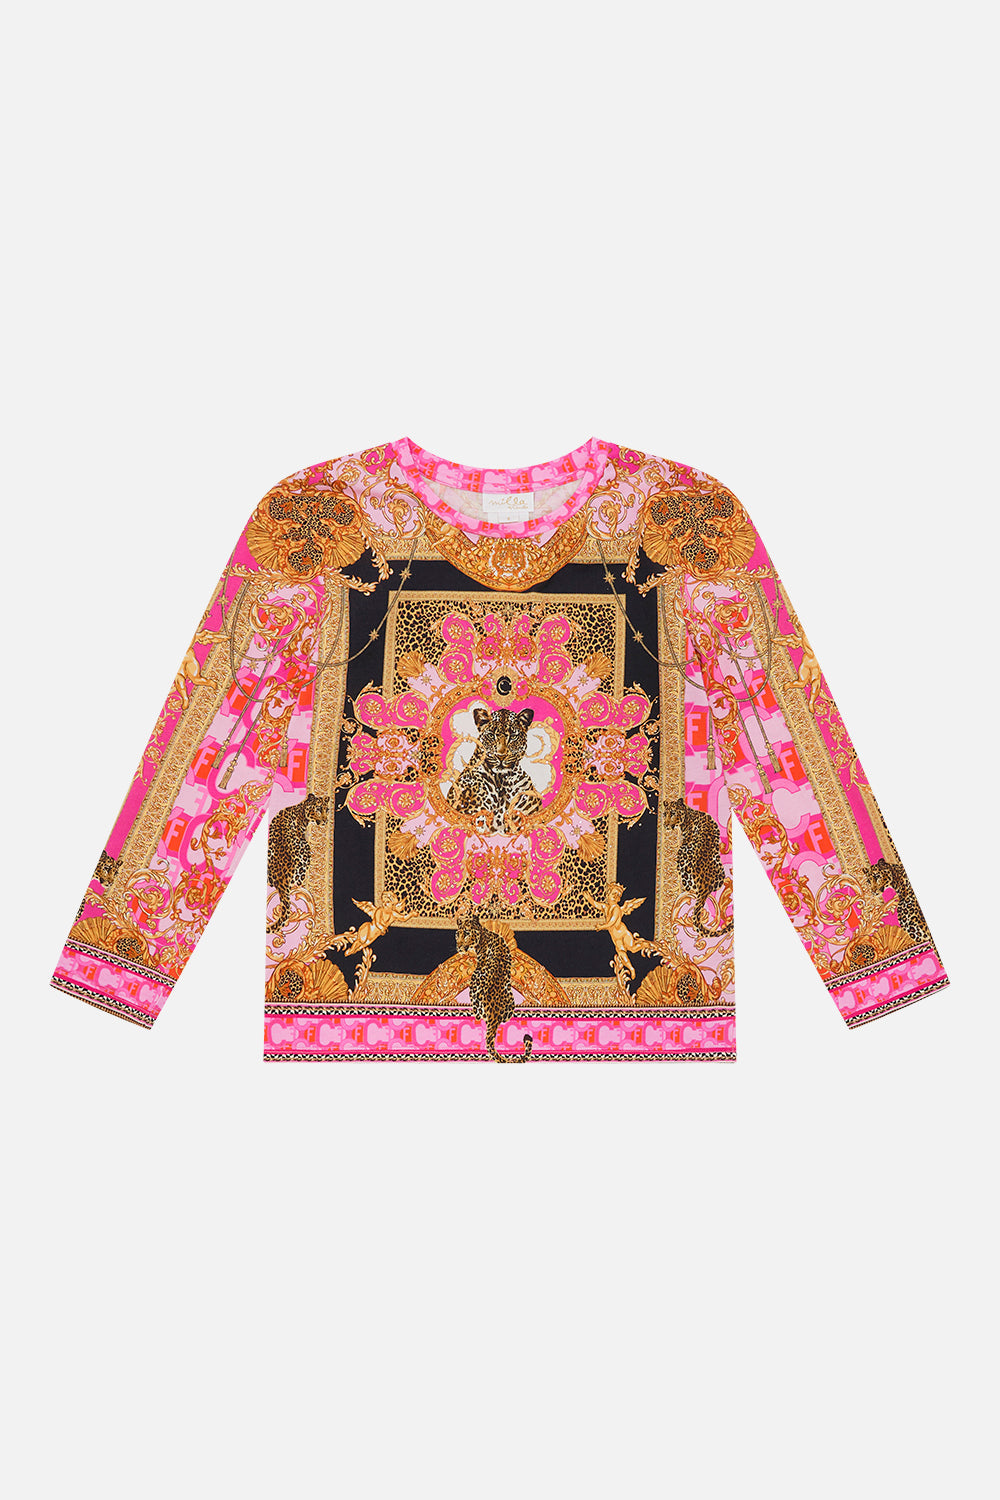 Product view of MILLA BY CAMILLA kids long sleeve top in Ciao Palazzo print